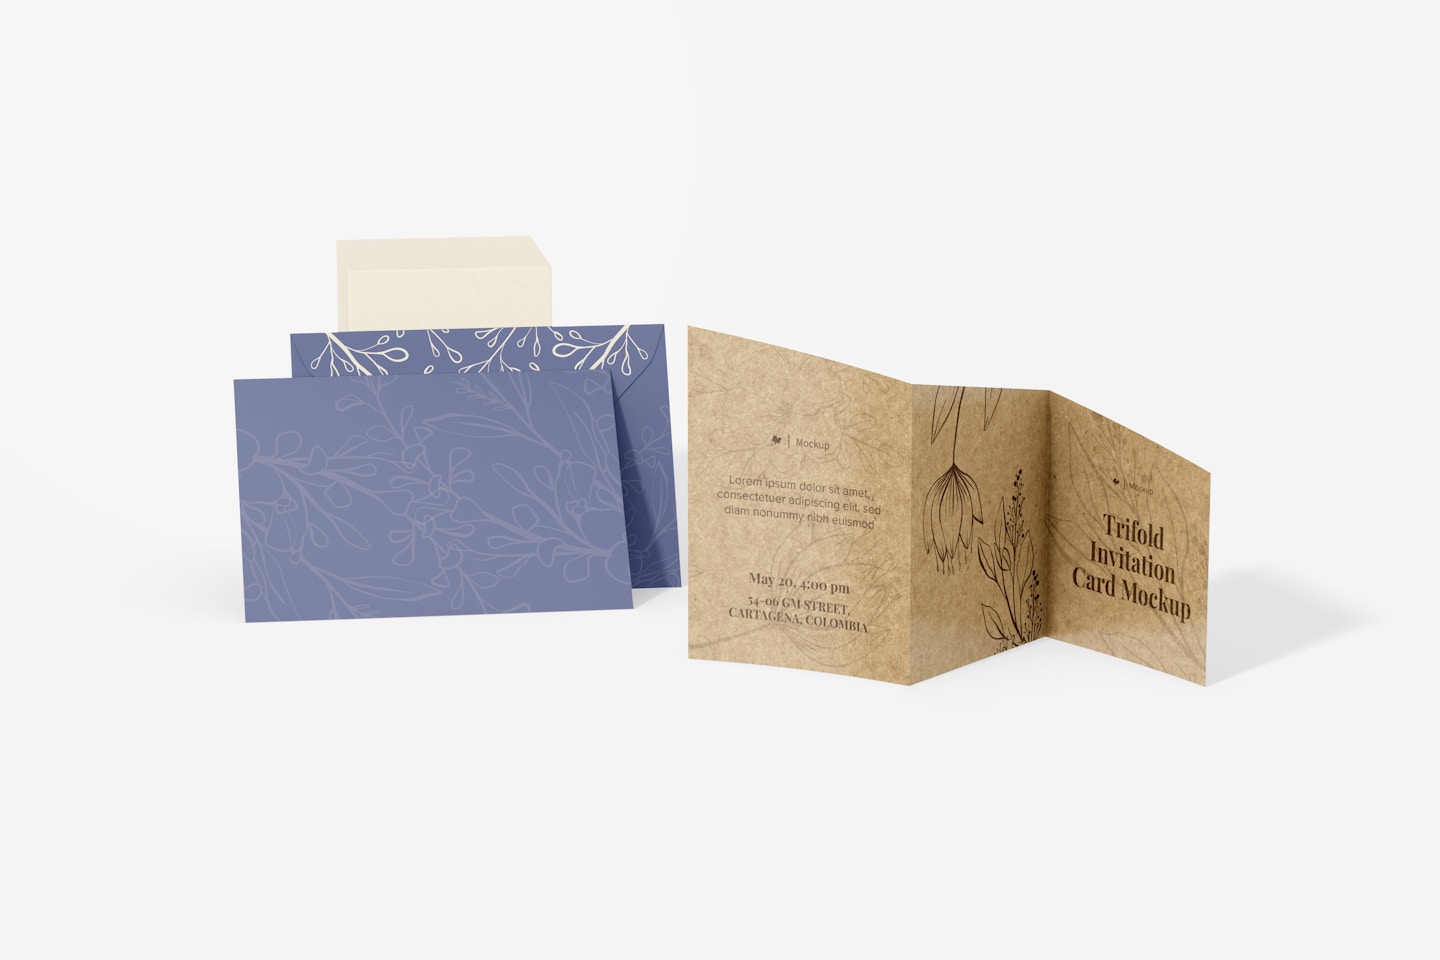 Trifold Invitation Card Mockup, with Envelopes